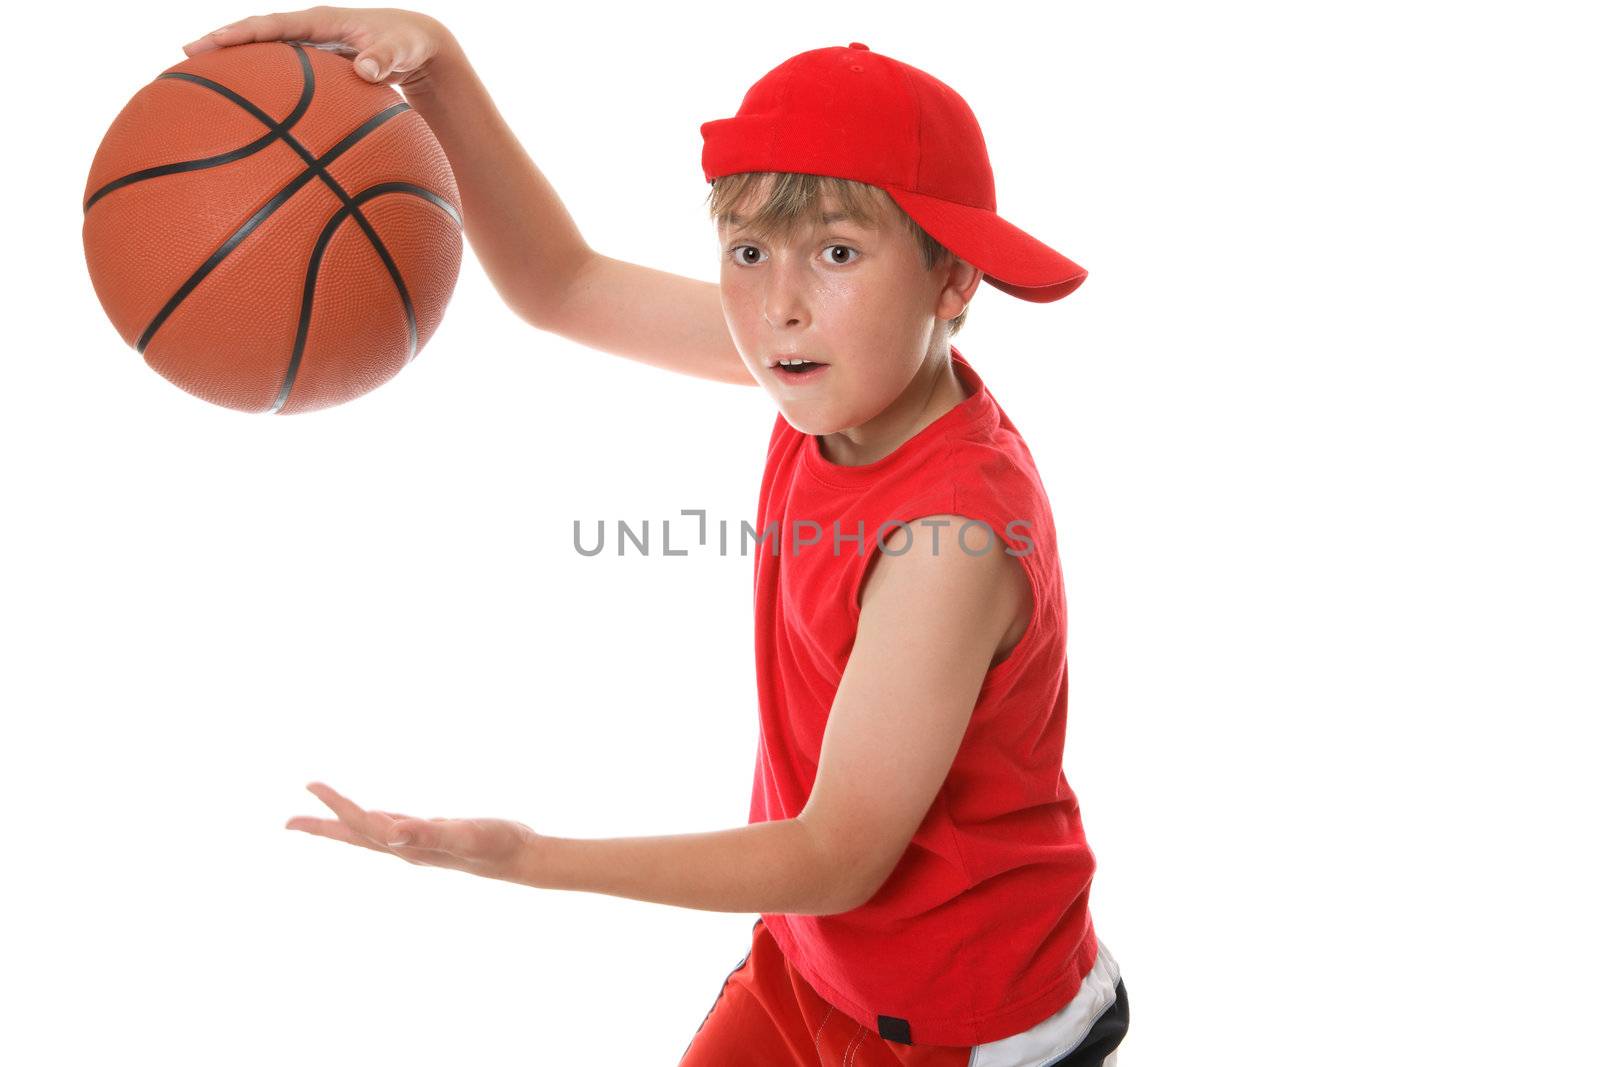 A child in action playing a game of basketball